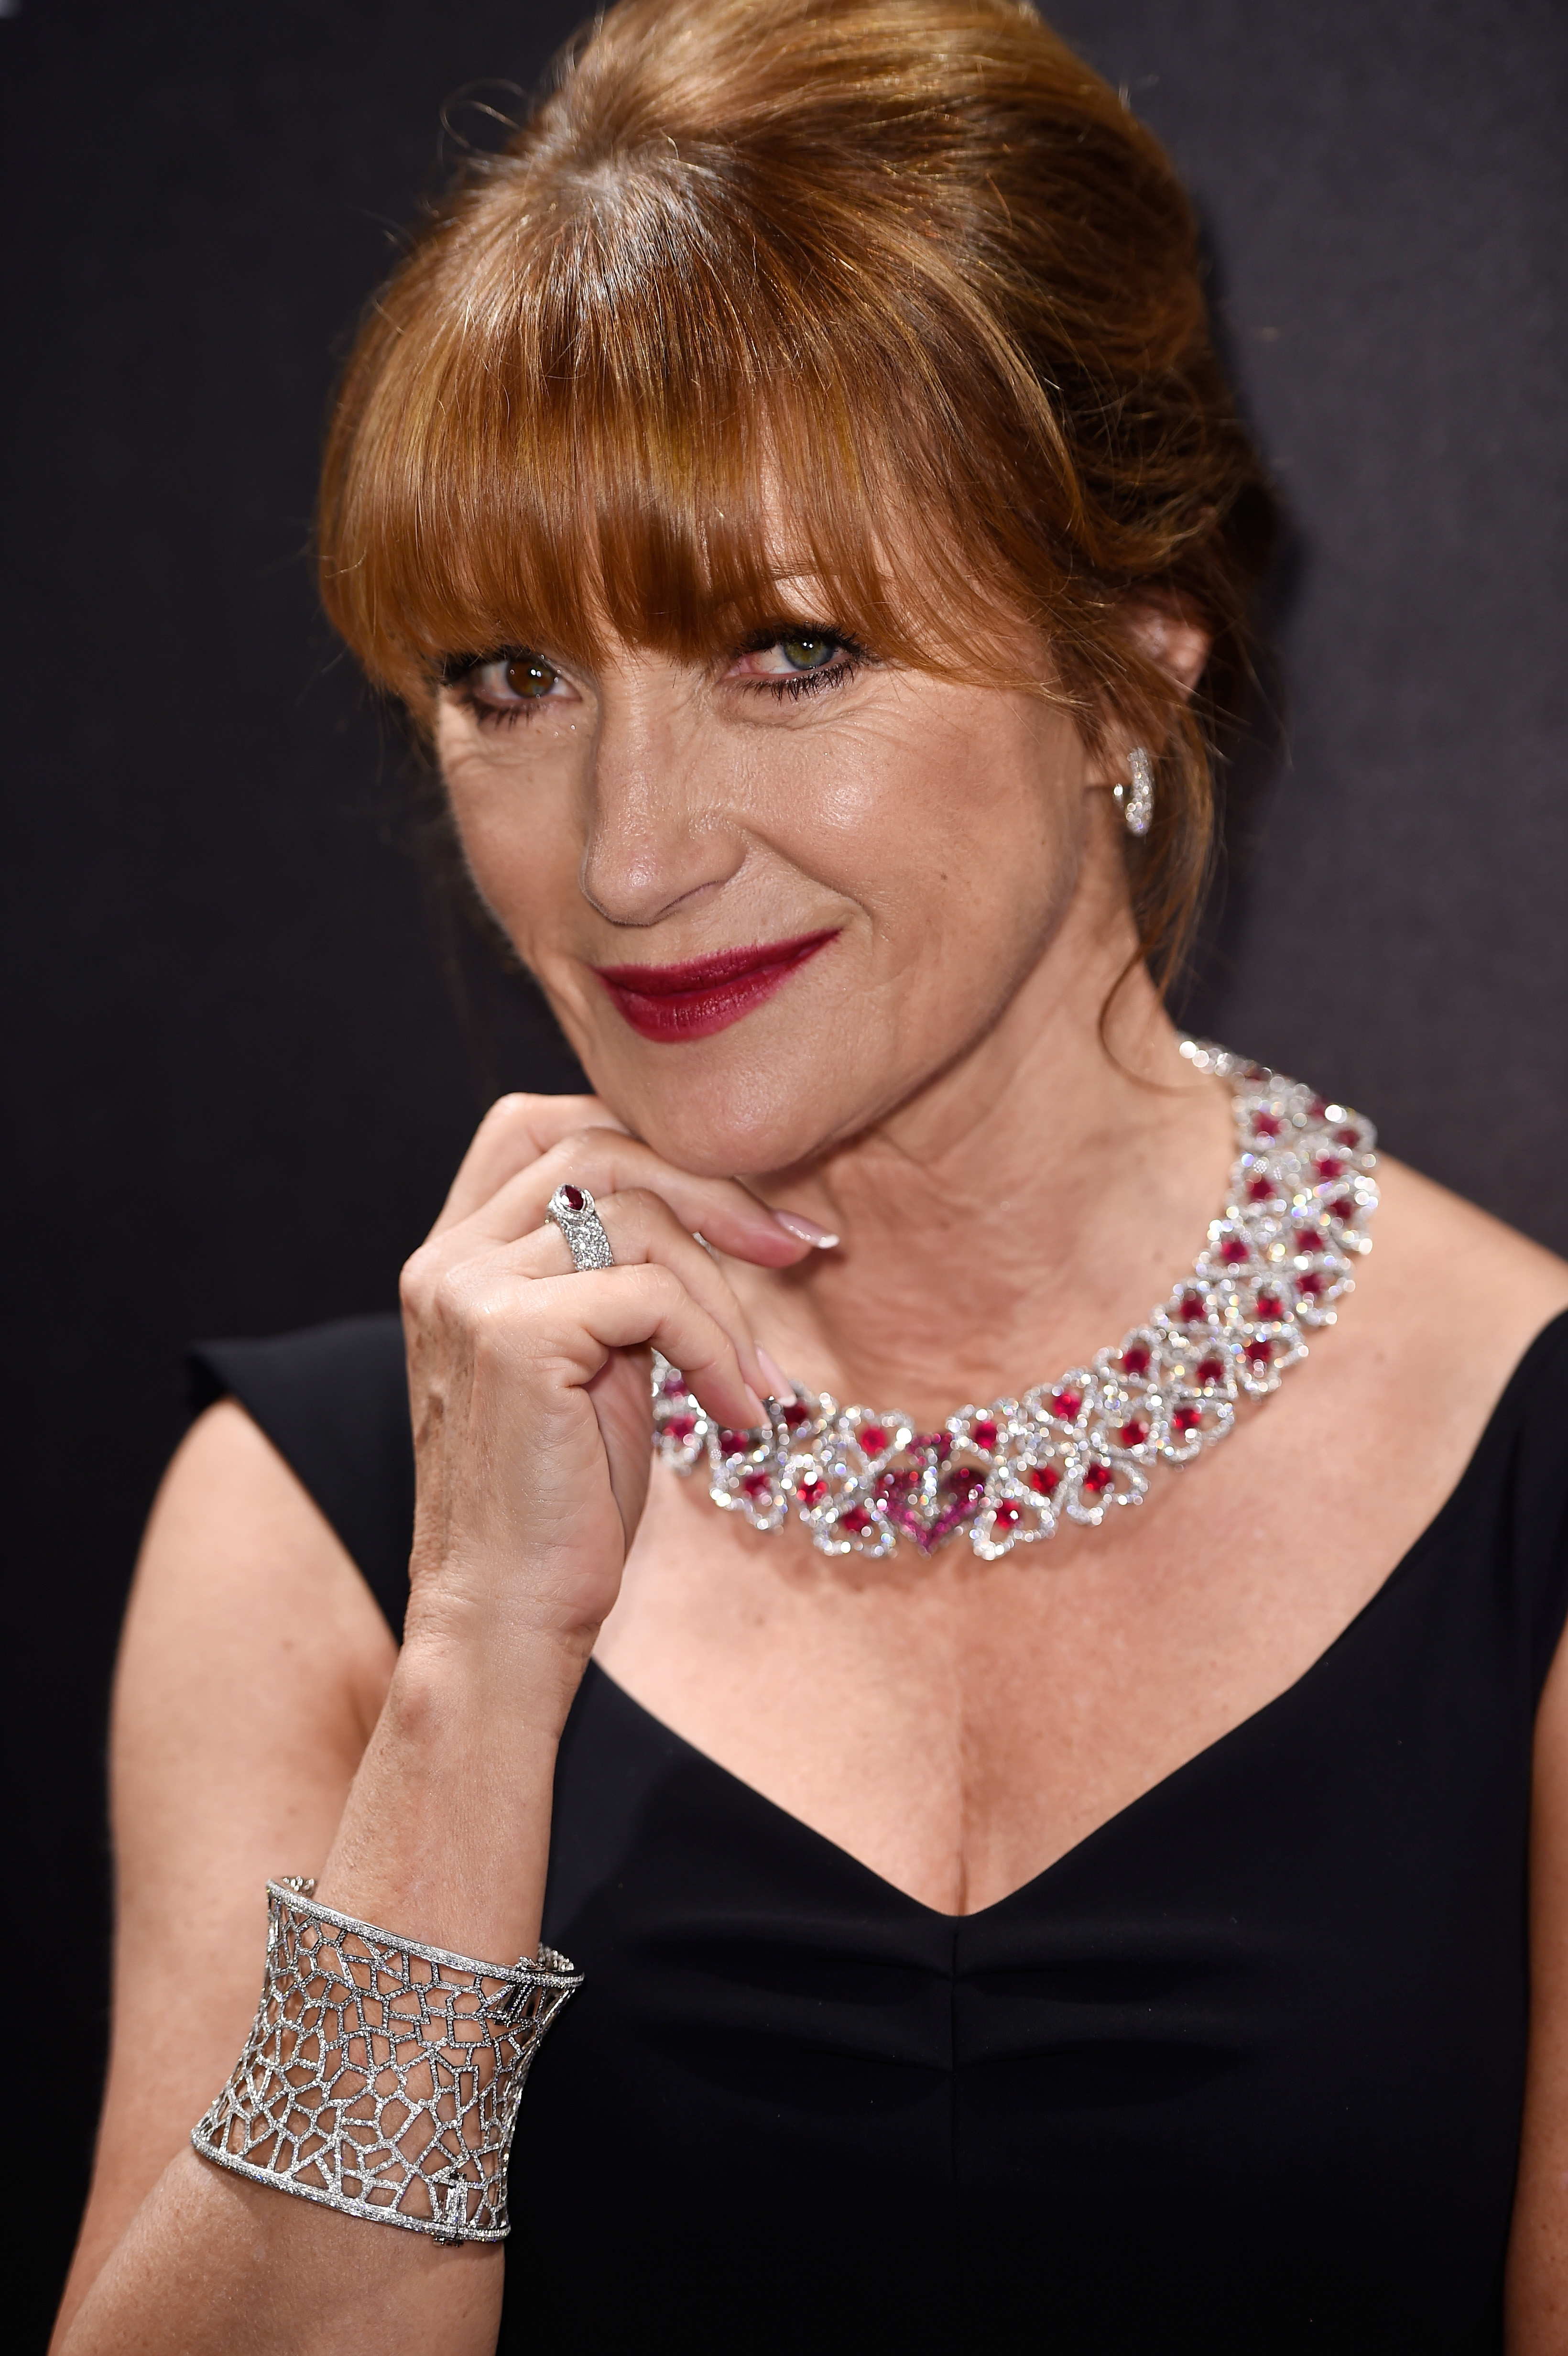 Jane Seymour at the Hollywood Reporter and Swarovski party during the Cannes Film Festival in Cannes, France, on May 14, 2015. | Source: Getty Images